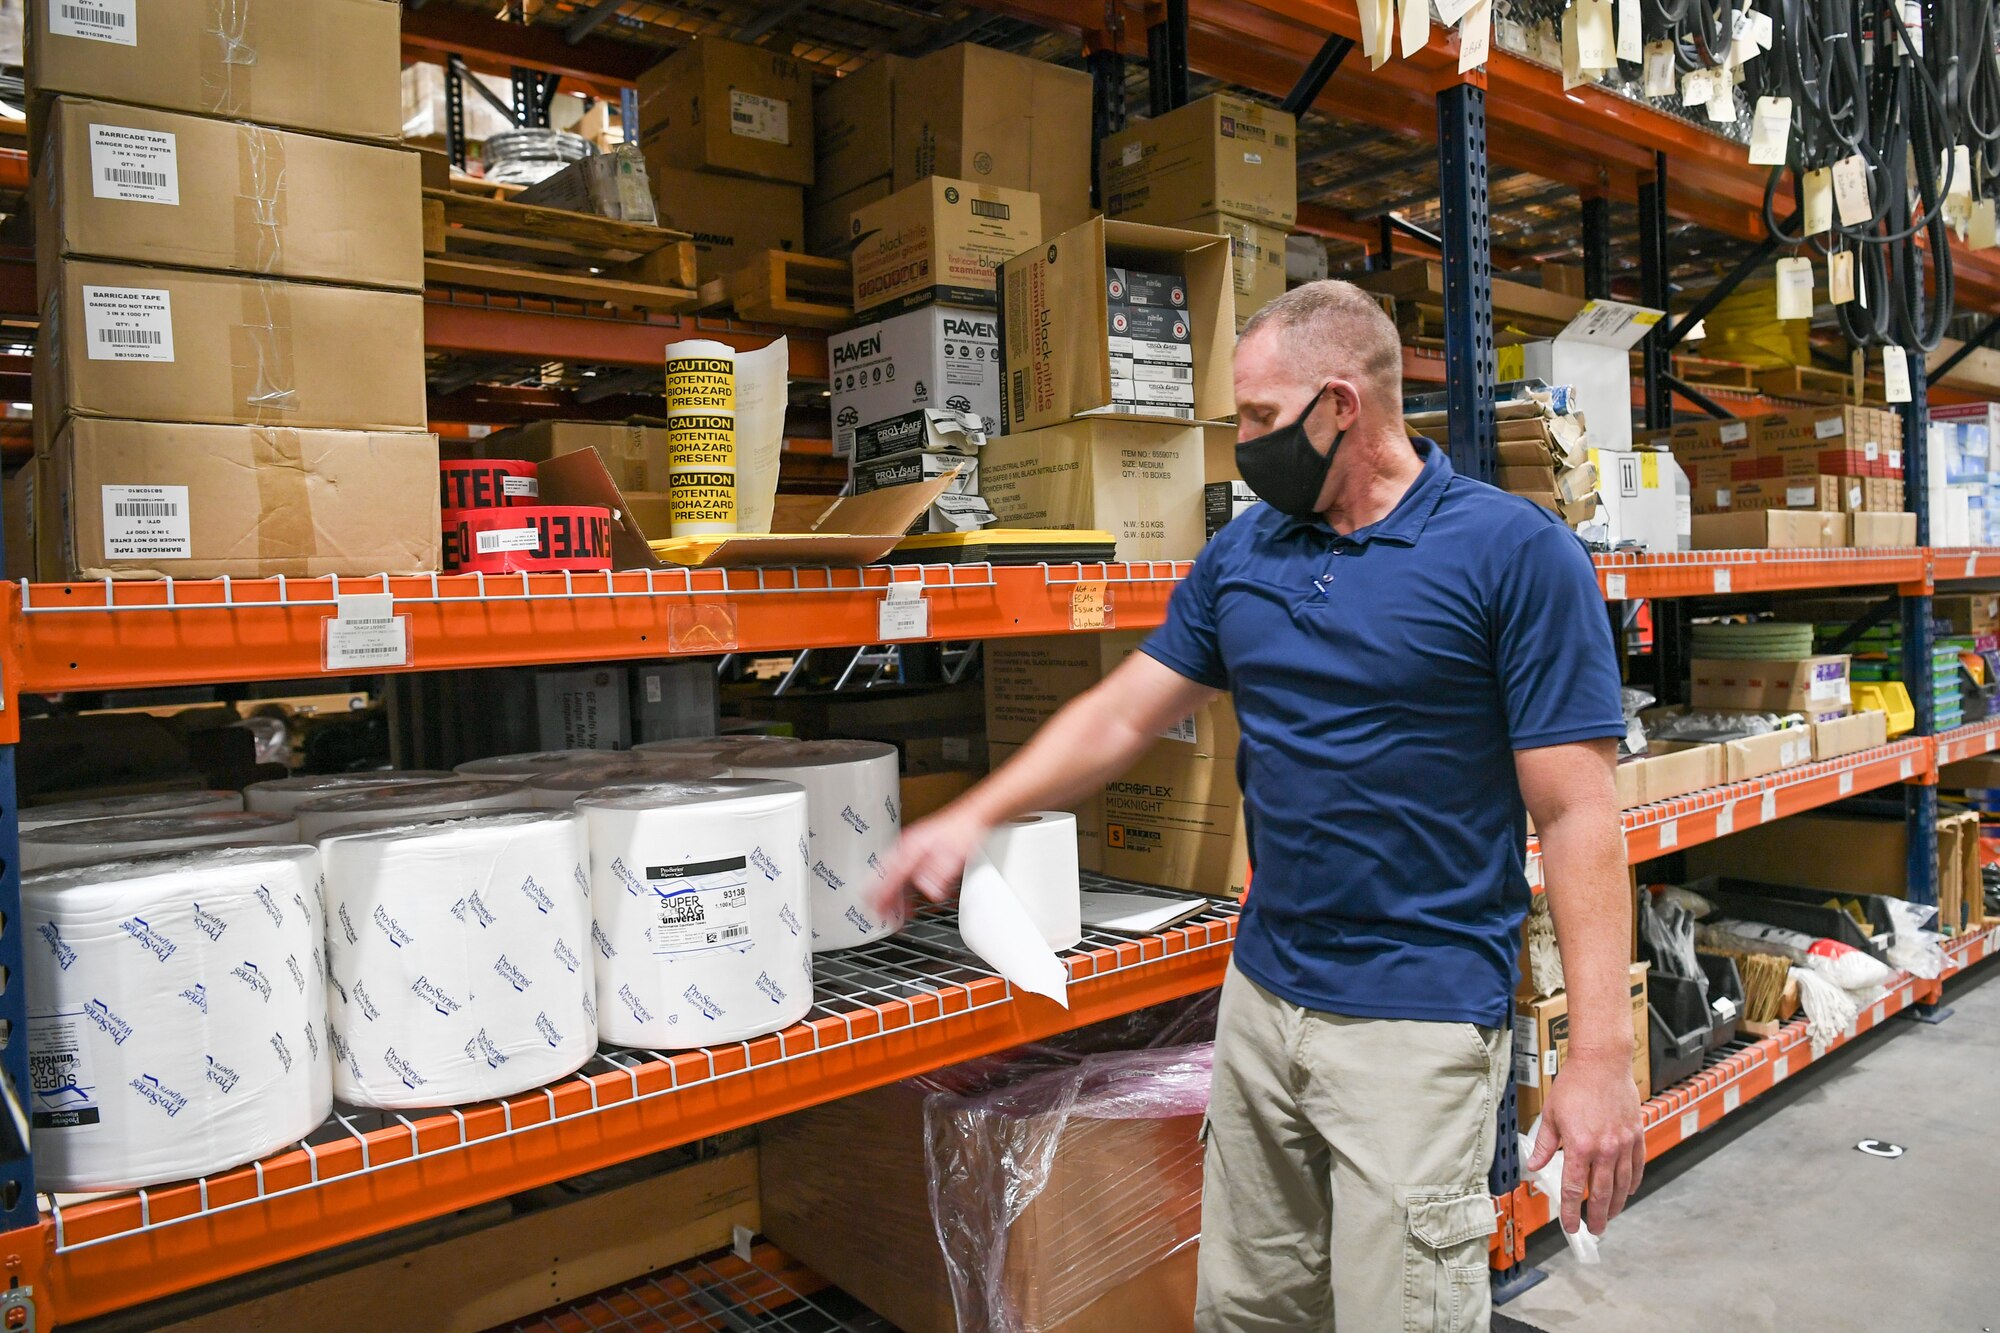 Brad Reed, 309th Maintenance Support Group material inventory center supervisor, browses the shelves of additional cleaning and protective supplies the group ordered due to COVID-19.